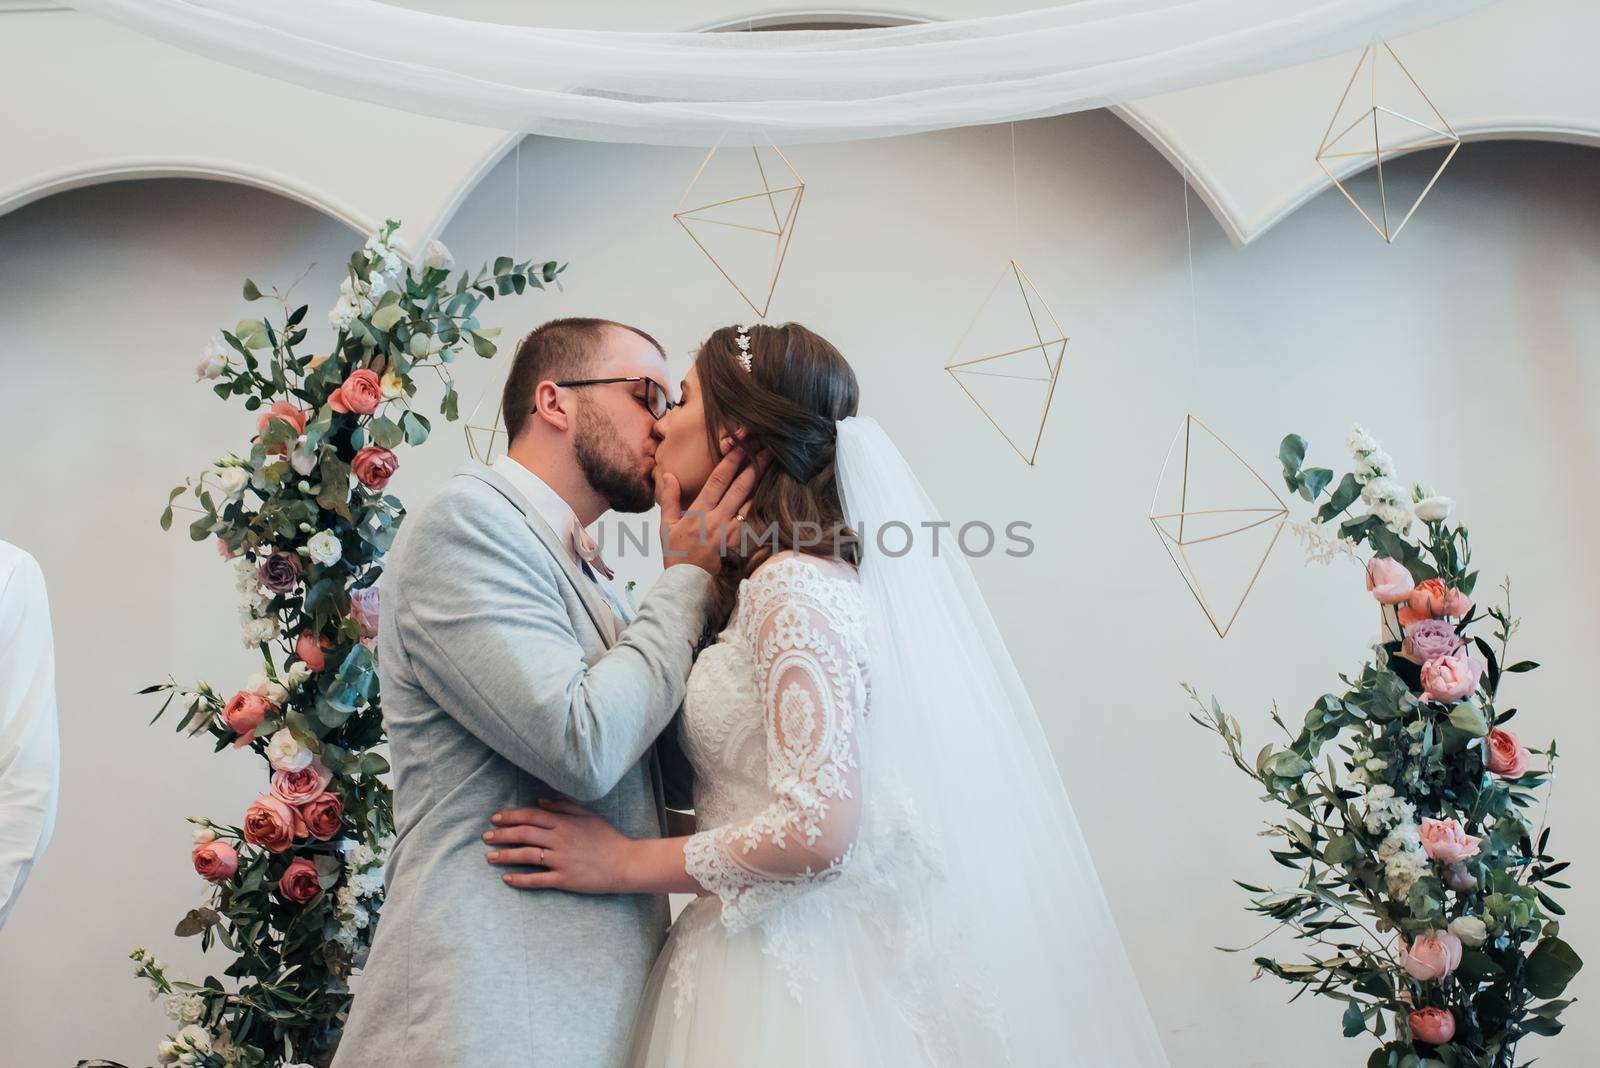 Wedding photography kiss bride and groom in different locations by lunarts